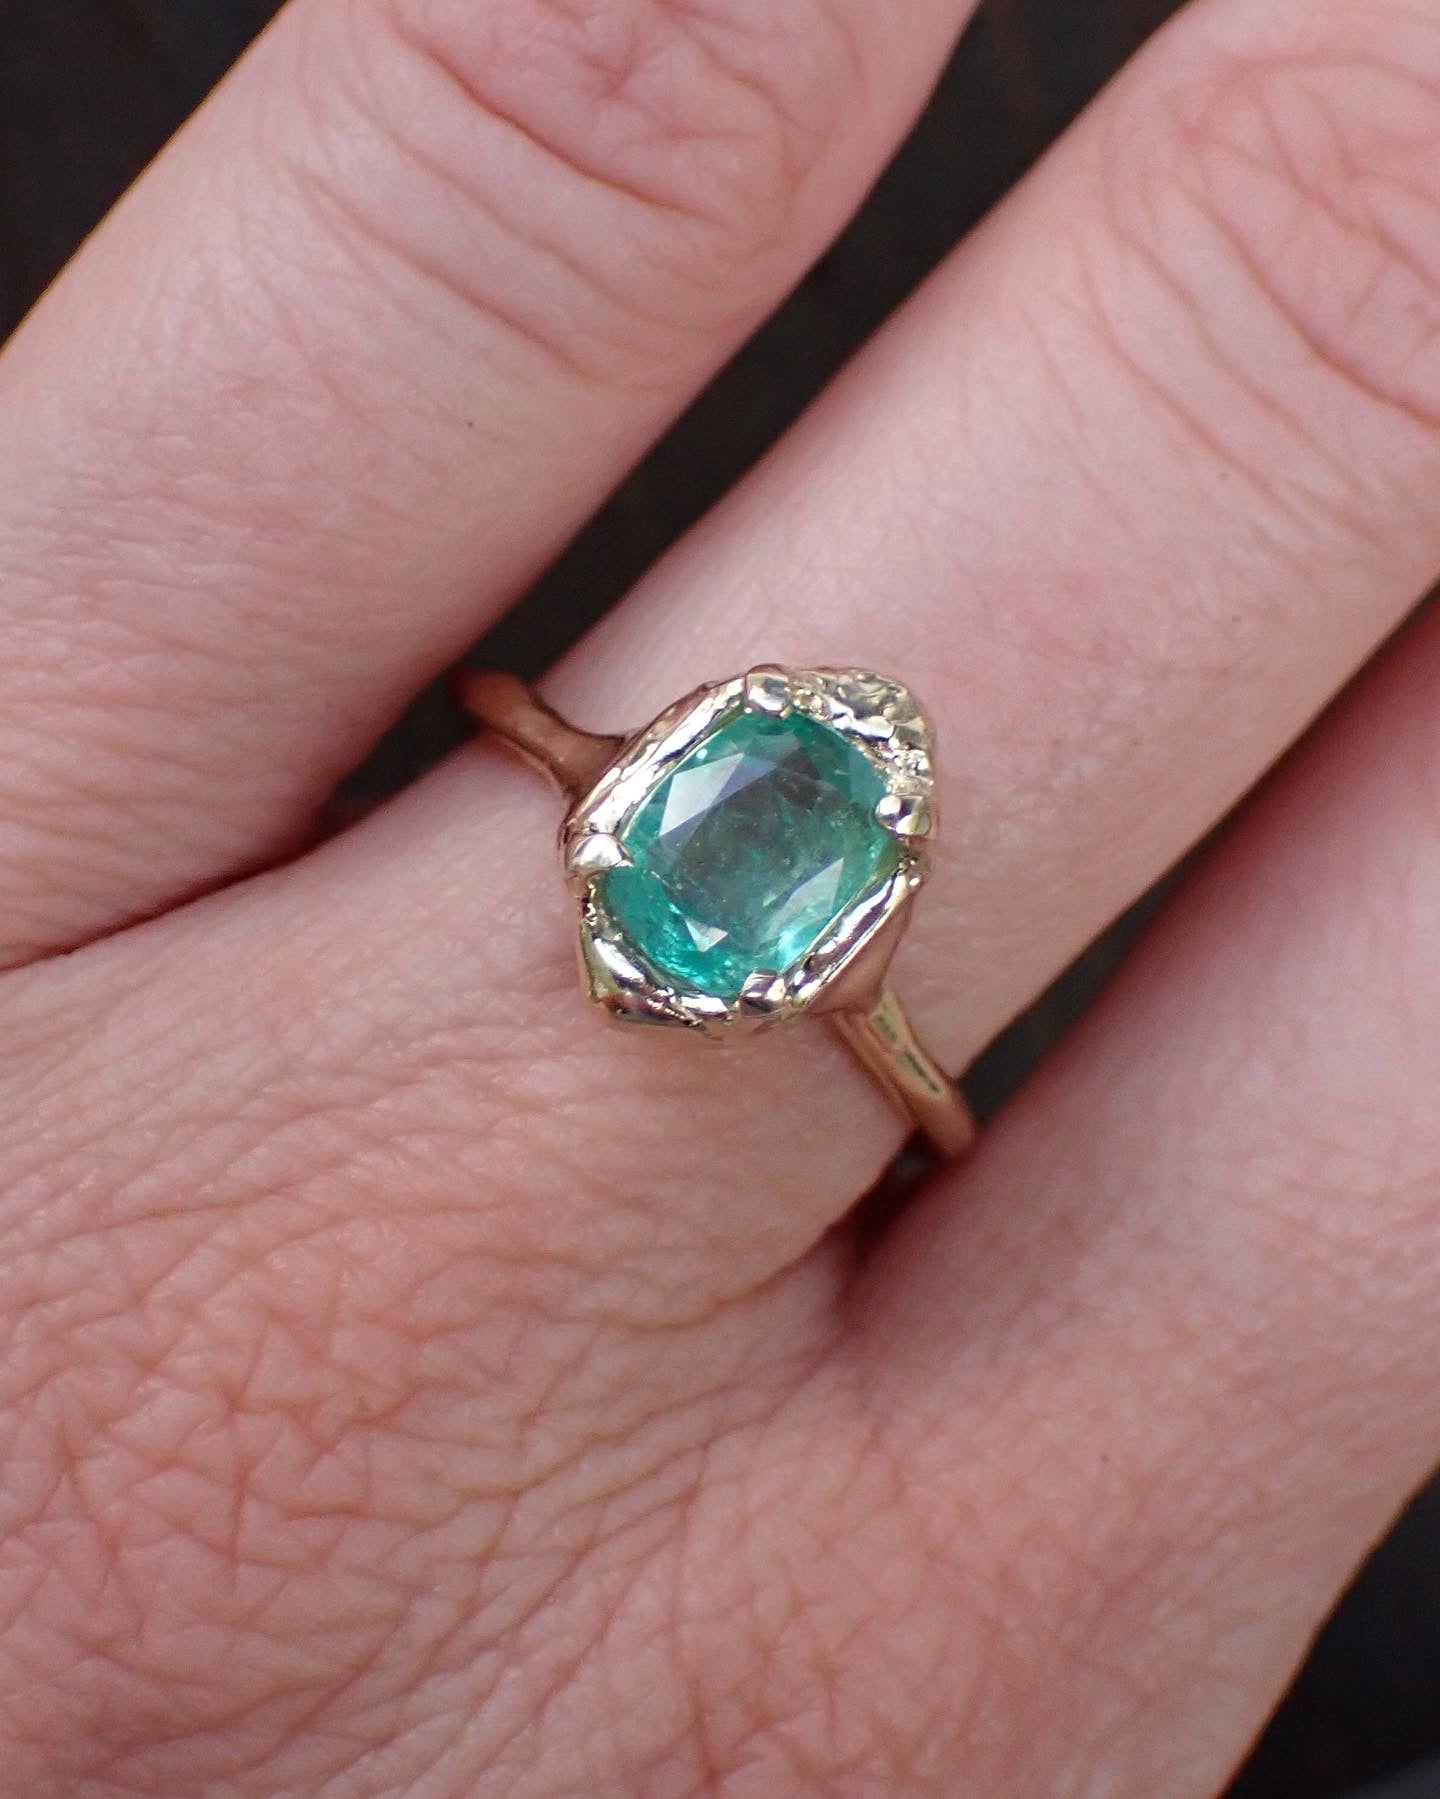 Majestic Natural Emerald in 14k Gold Setting - mossNstone